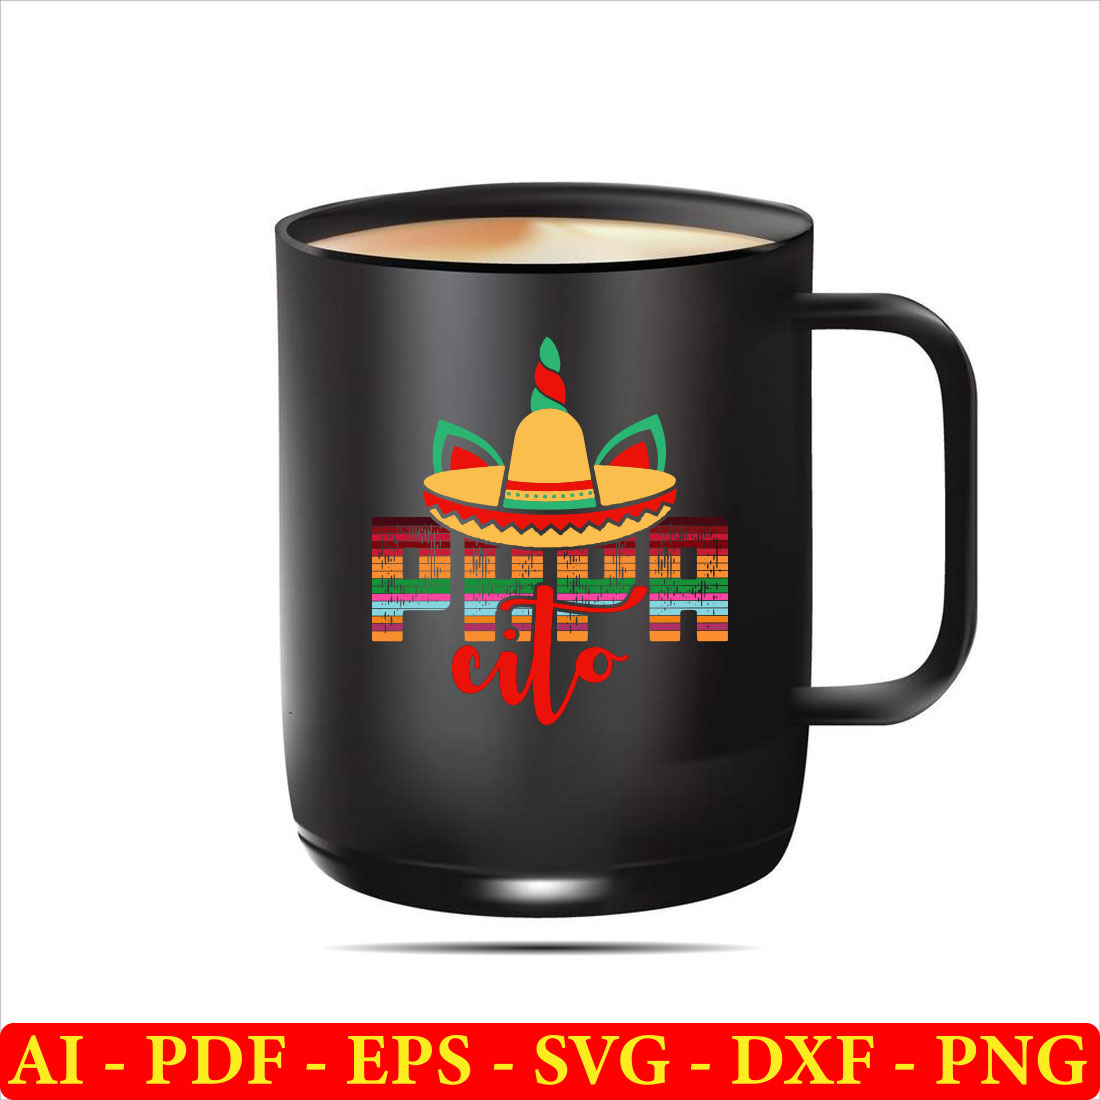 Black coffee mug with a mexican hat on it.